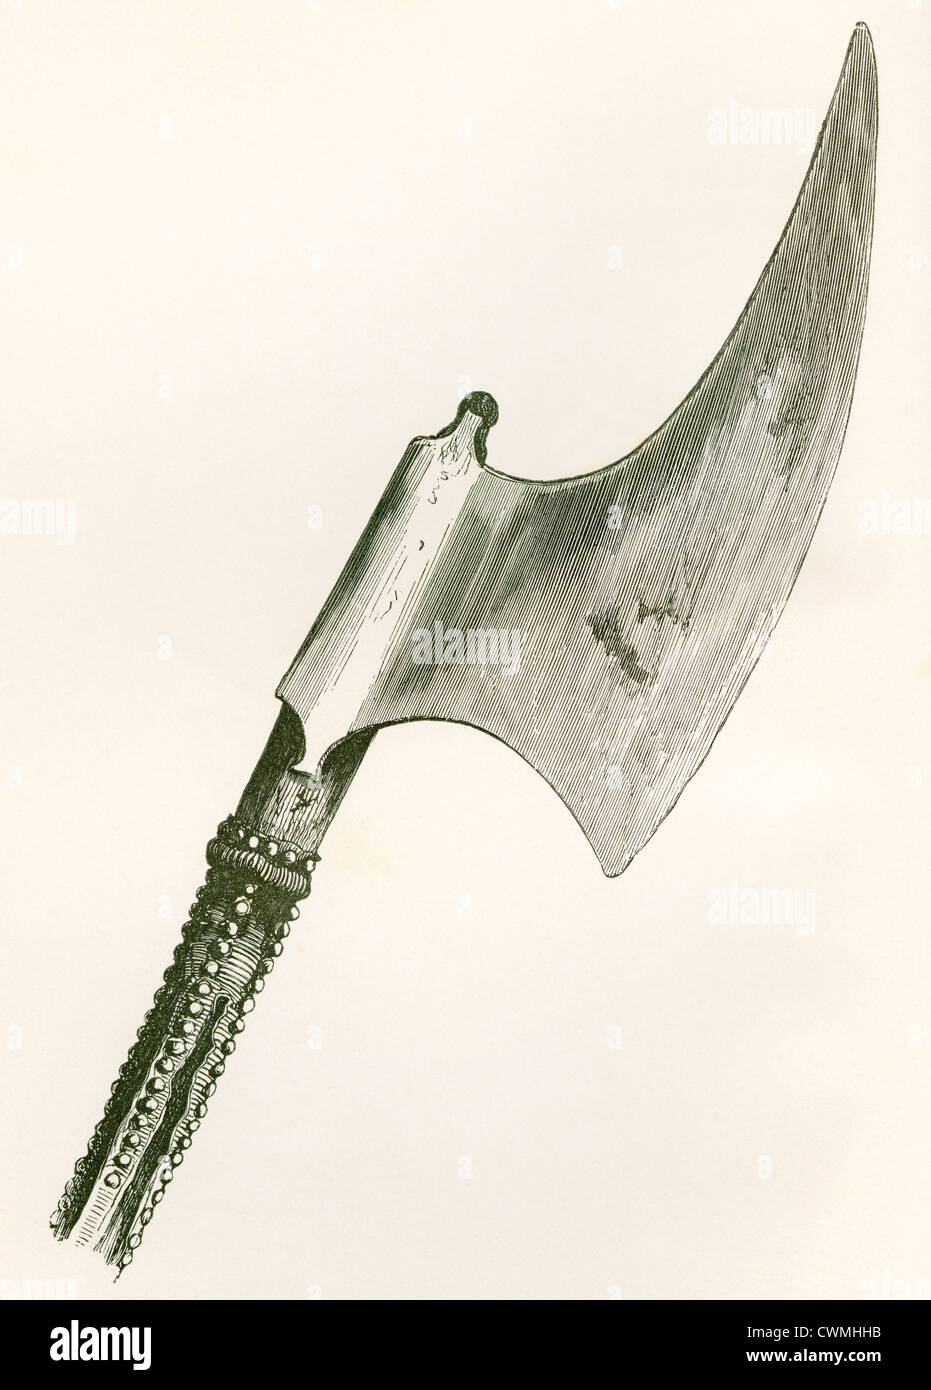 16th century Ceremonial Beheading Axe, carried by the Master Gaoler of the Tower of London. Stock Photo